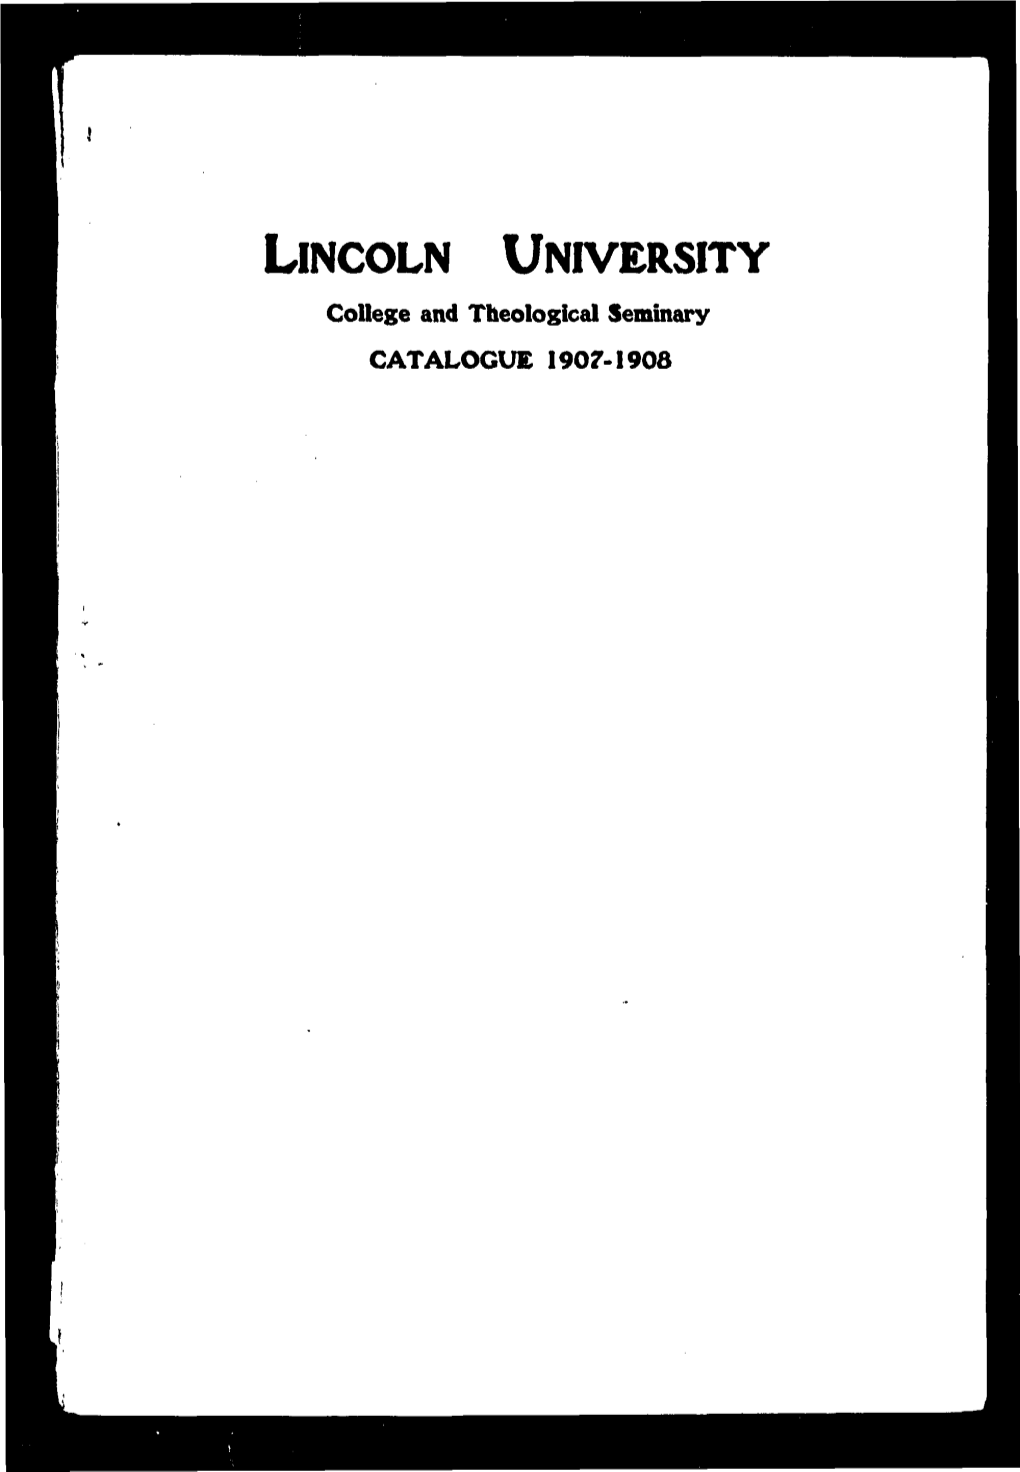 LINCOLN UNIVERSITY College and Theological Seminary CATALOGUE 1907-1908